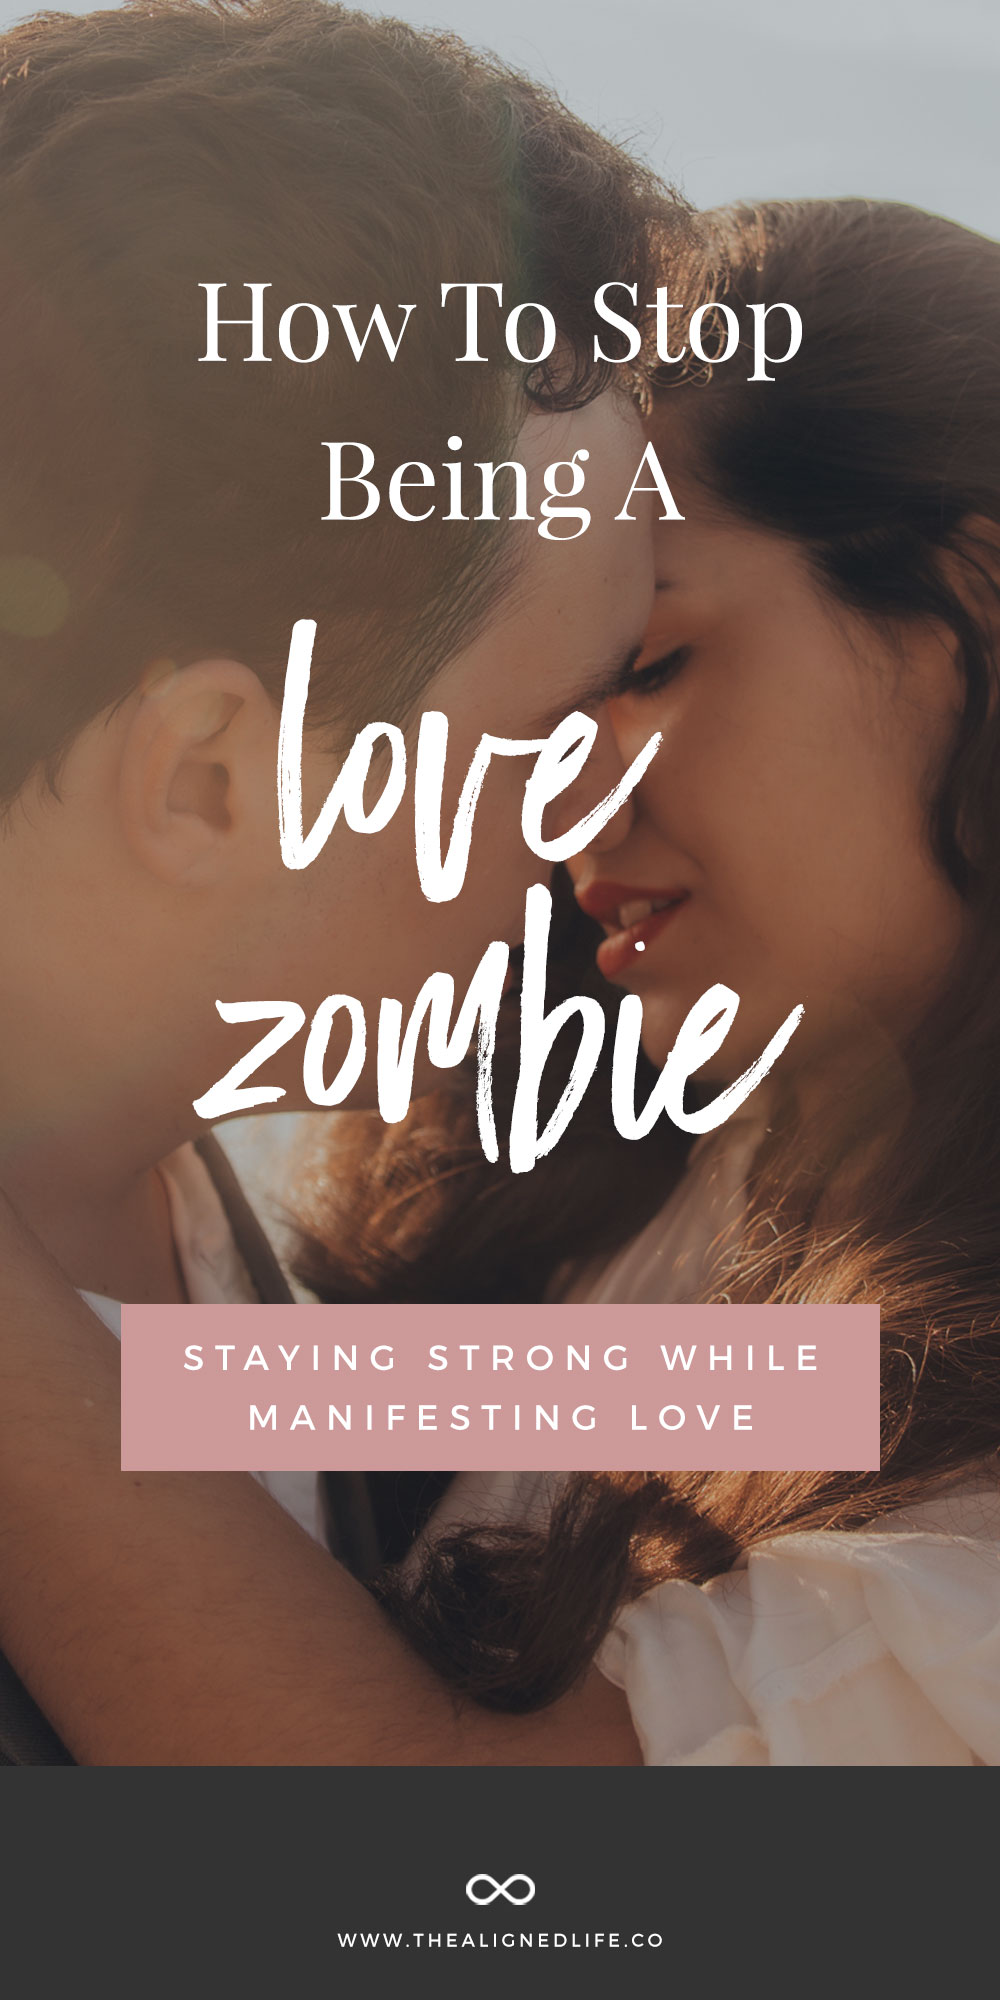 How To Stop Being A Love Zombie: Staying Strong While Manifesting Love